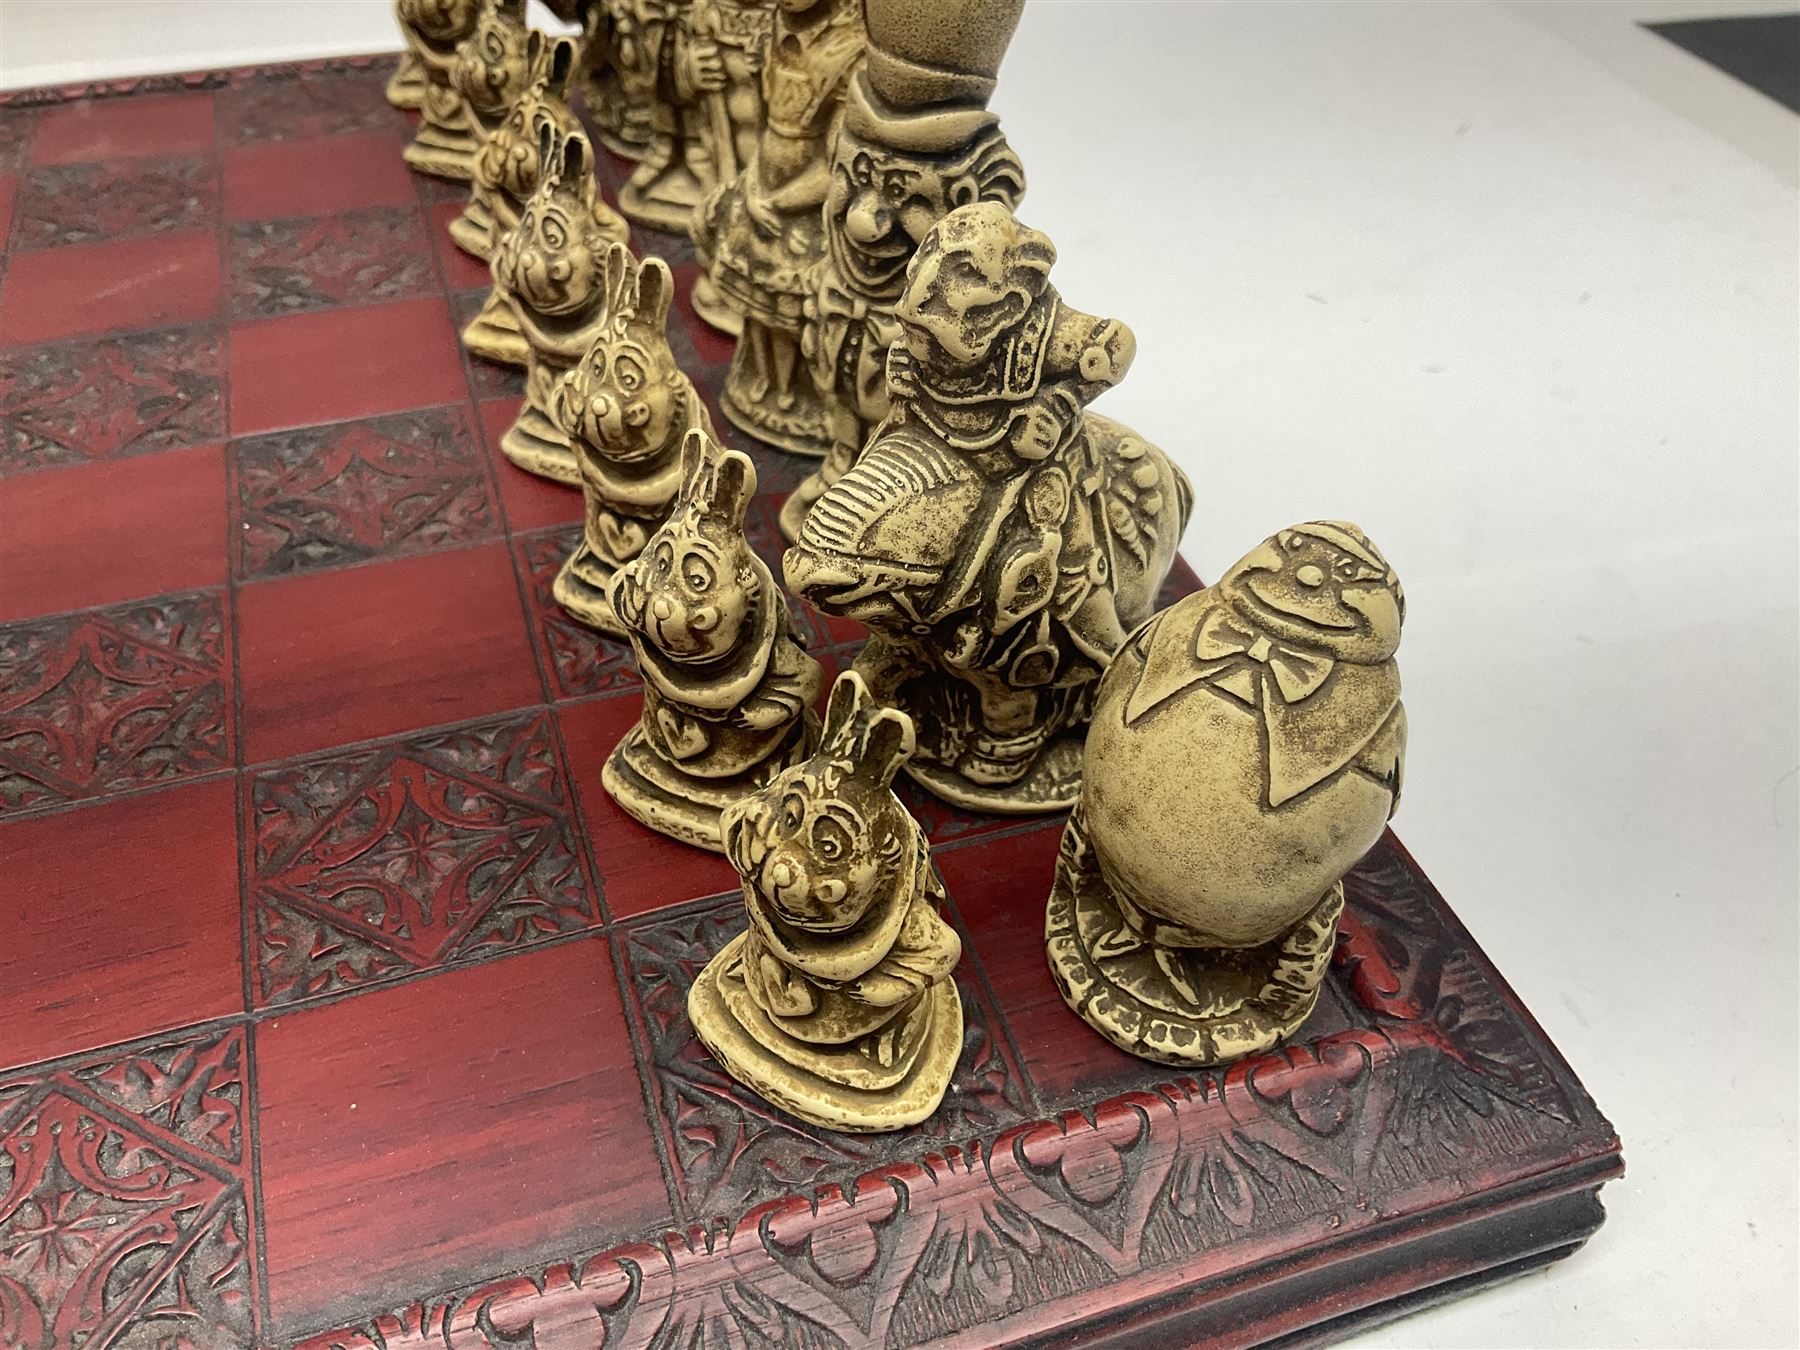 Alice in Wonderland themed chess set - Image 2 of 11